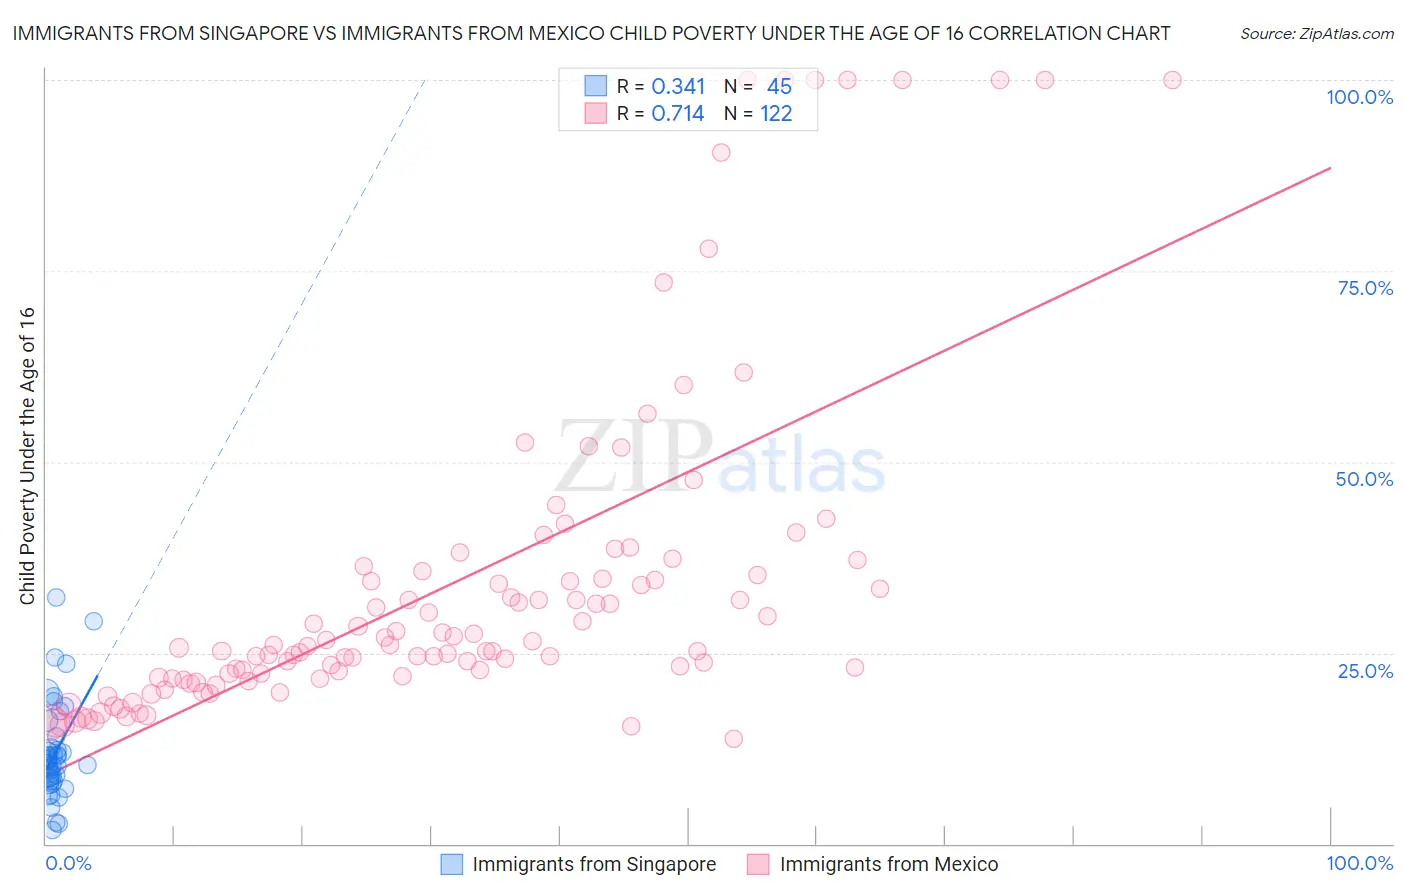 Immigrants from Singapore vs Immigrants from Mexico Child Poverty Under the Age of 16